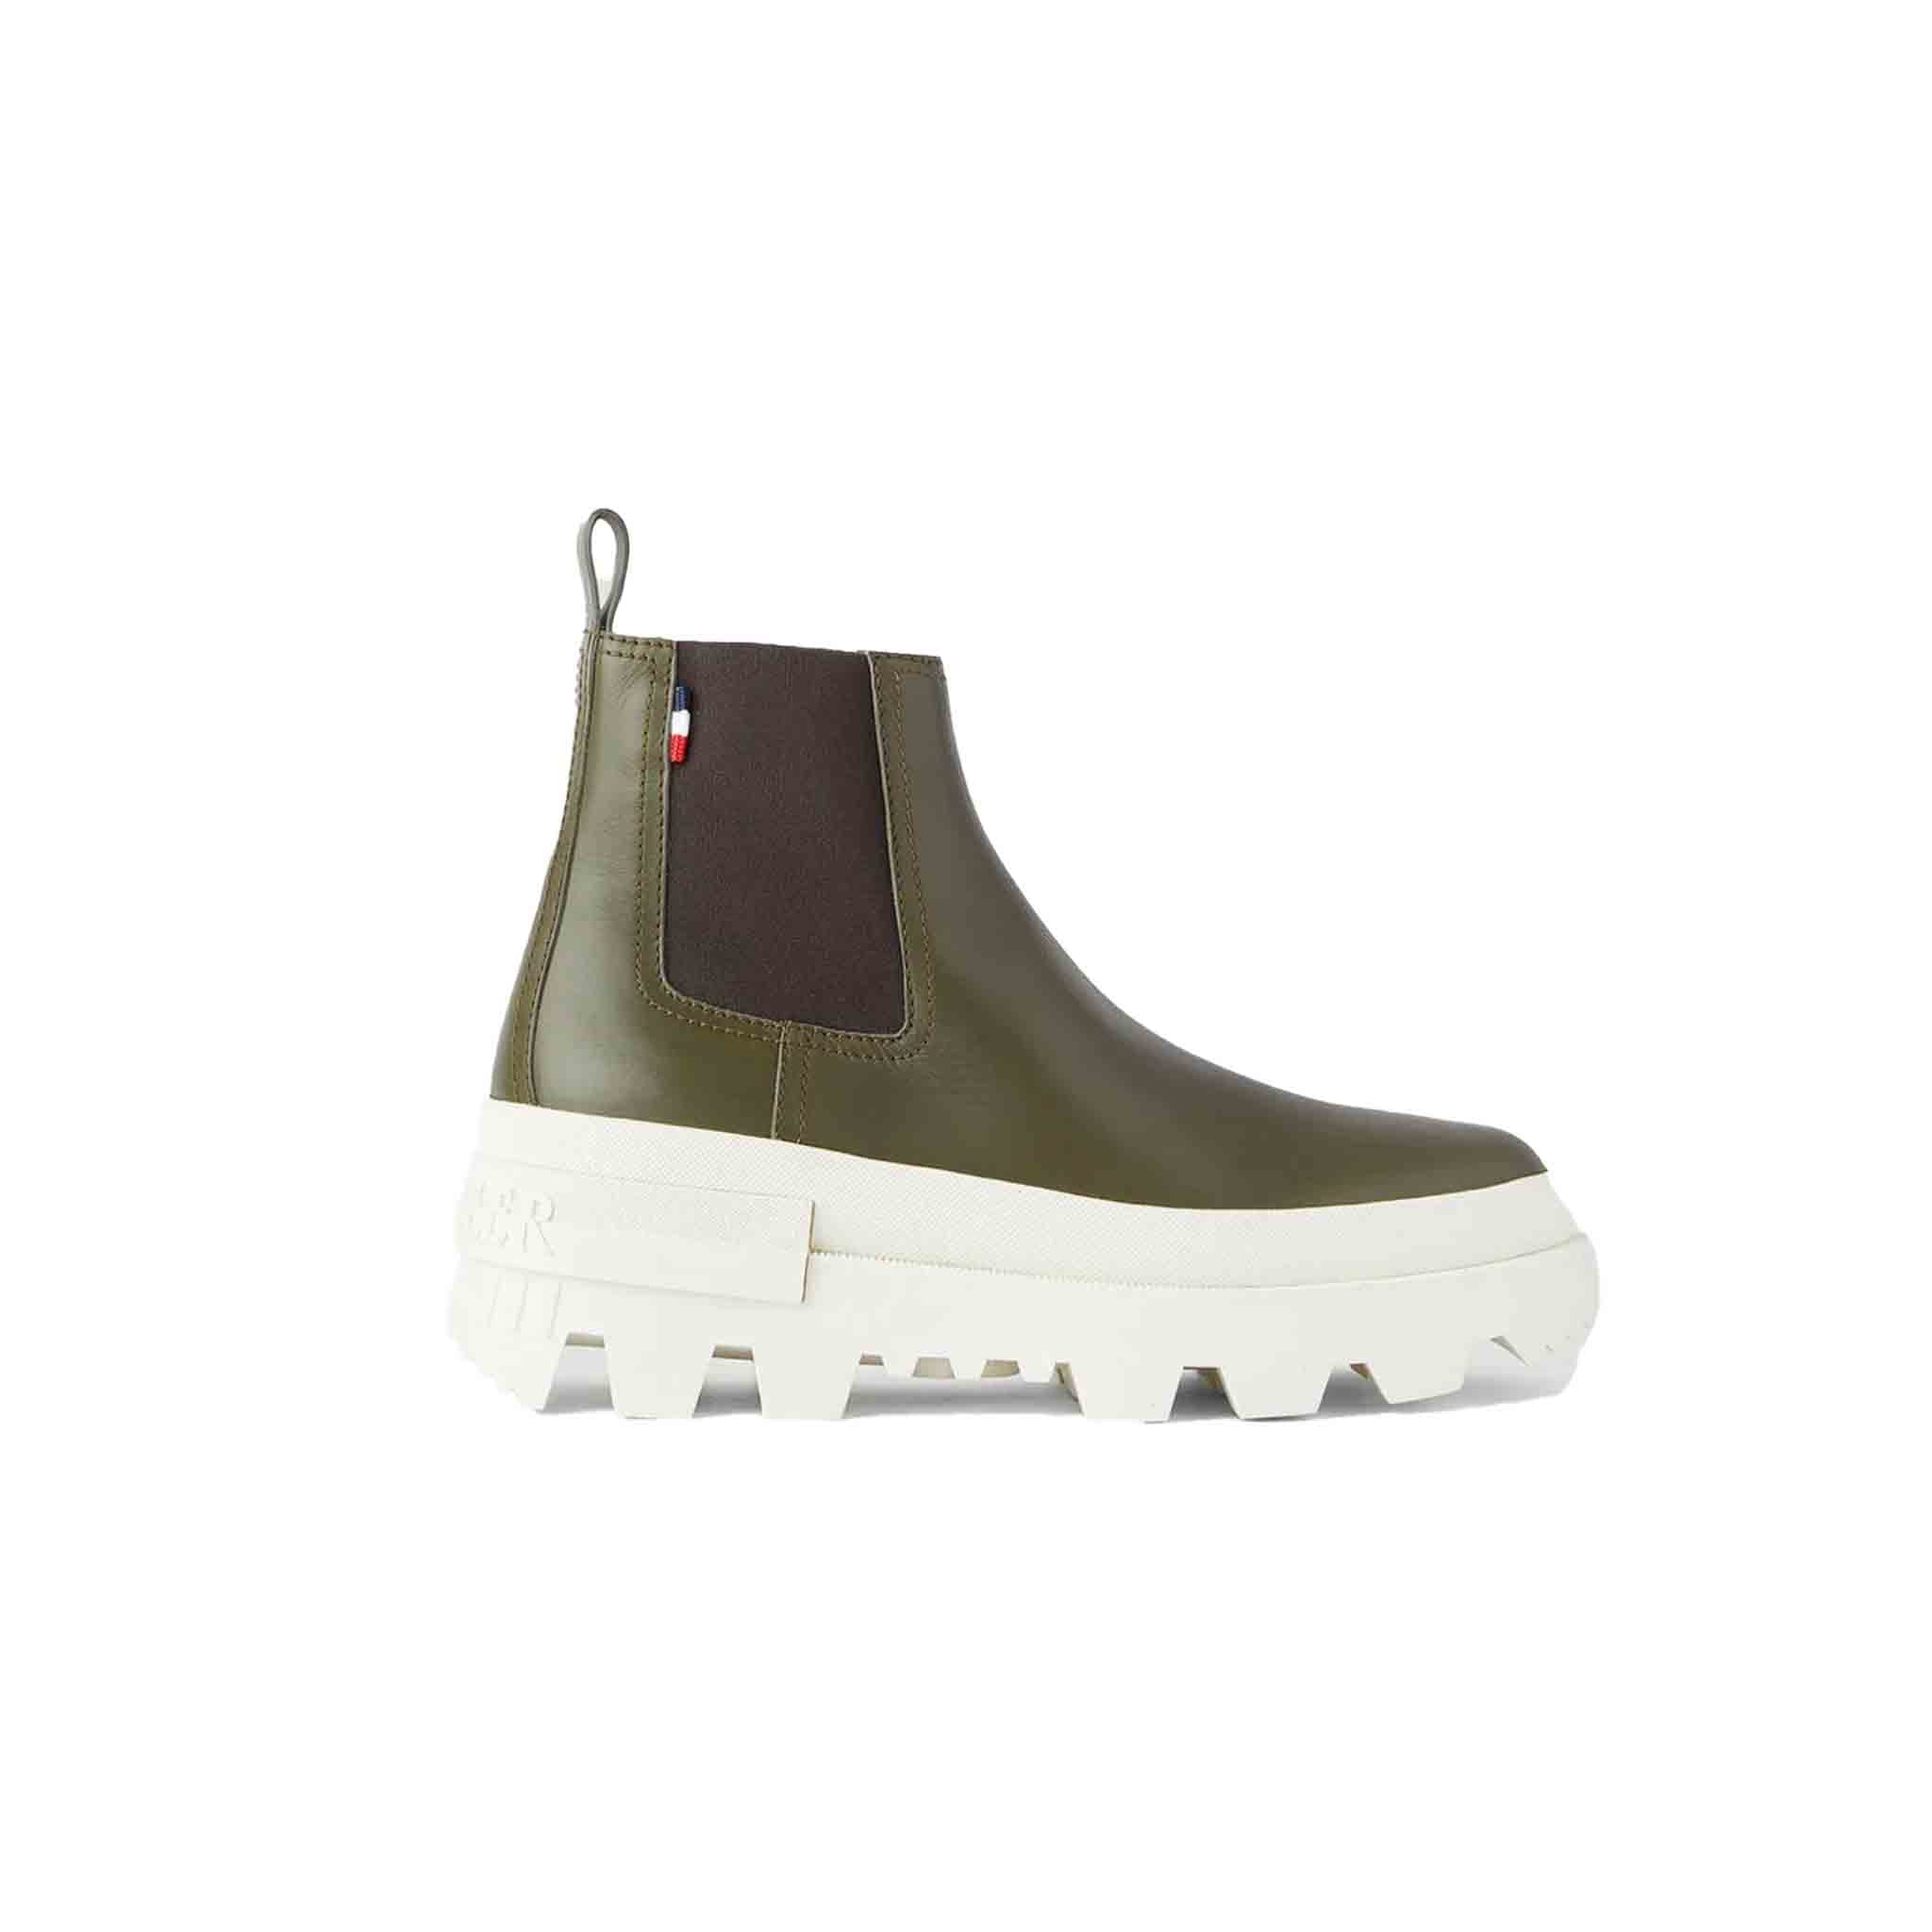 The Lir boots from Moncler are heavily inspired by The Beatles. They're crafted with luxurious leather uppers and thick, rugged rubber soles that are reminiscent of the brand’s hiking heritage. You’ll also discover elasticated side panels and a pull tab on the back, so you can slip them on with ease.